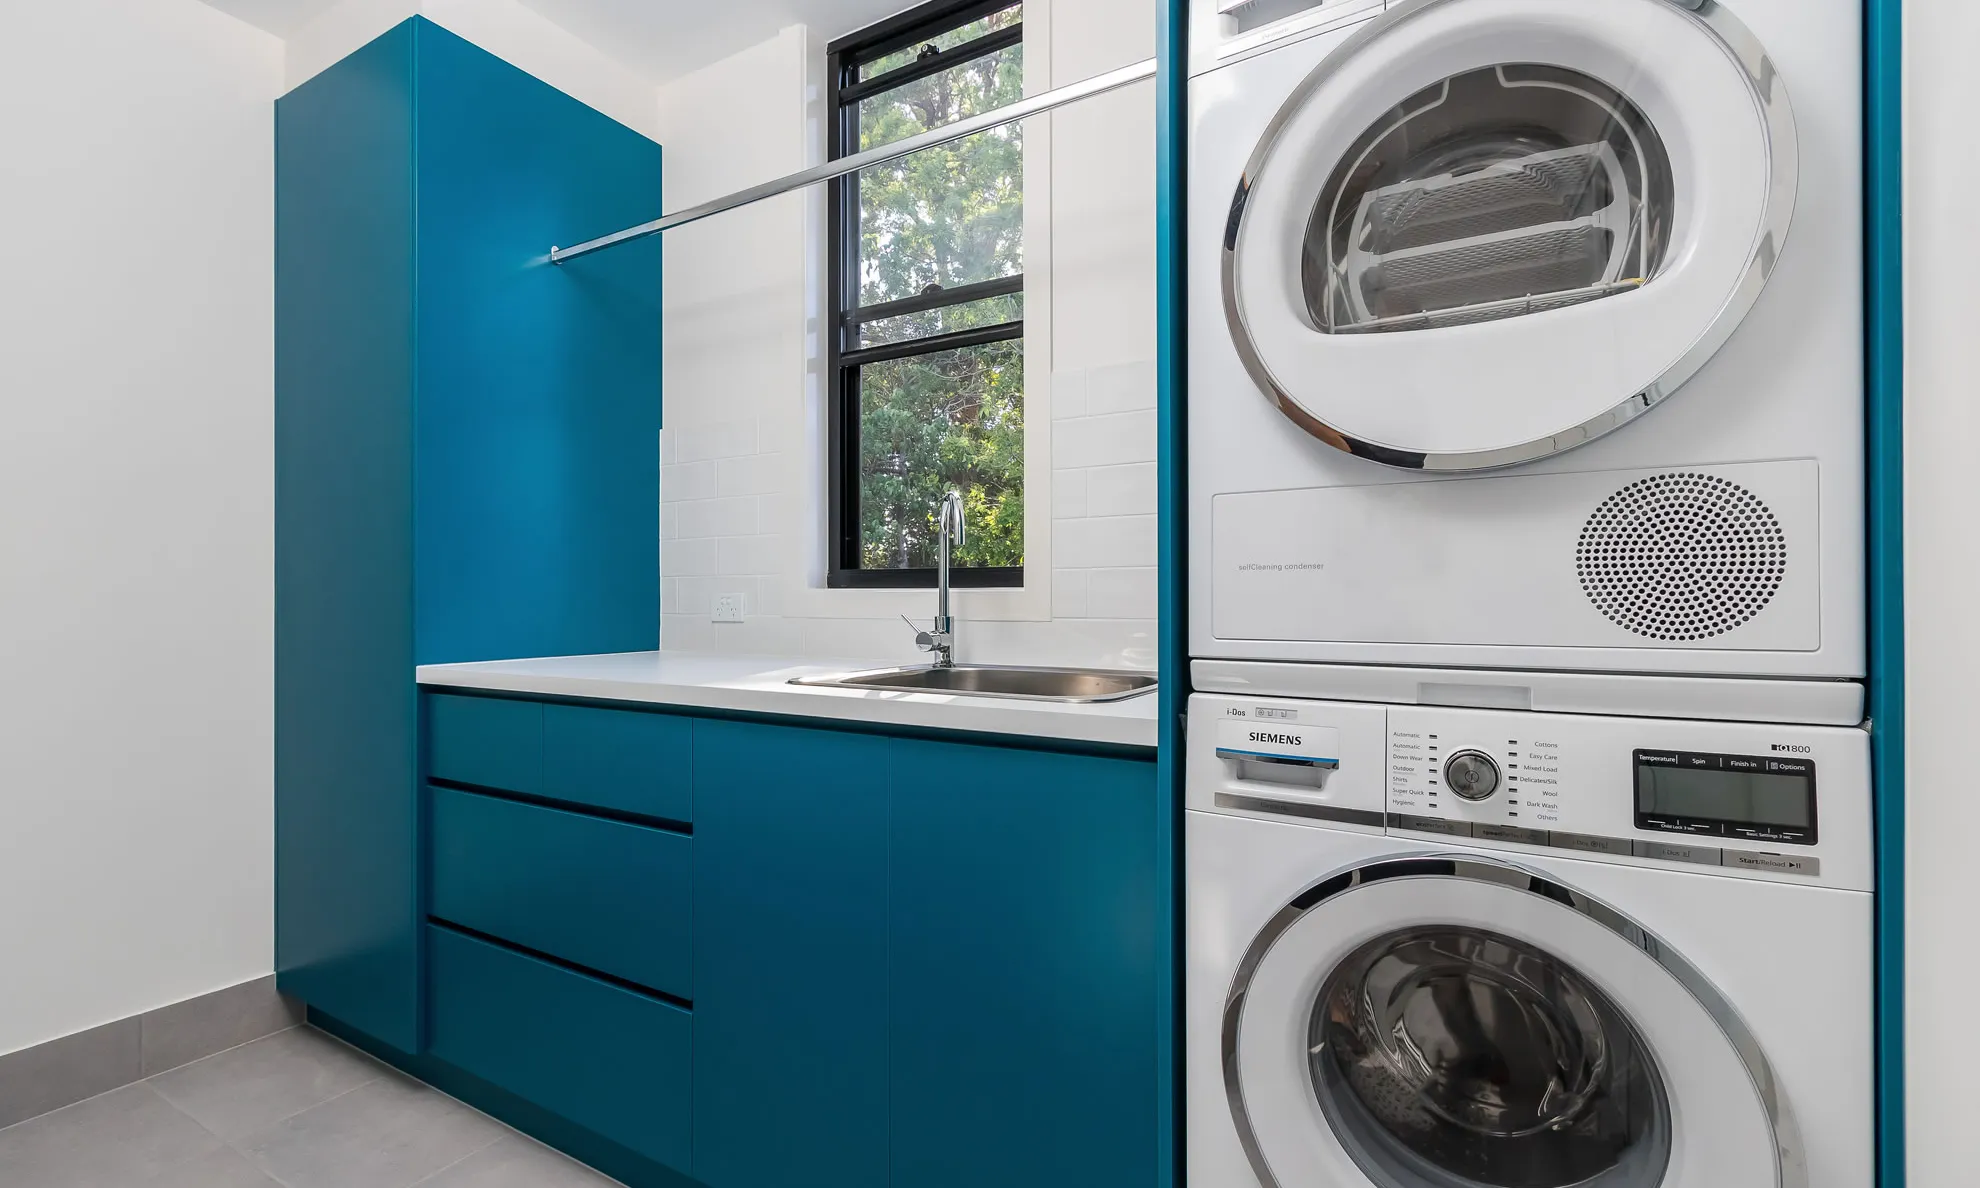 Laundry-blue cabinetry